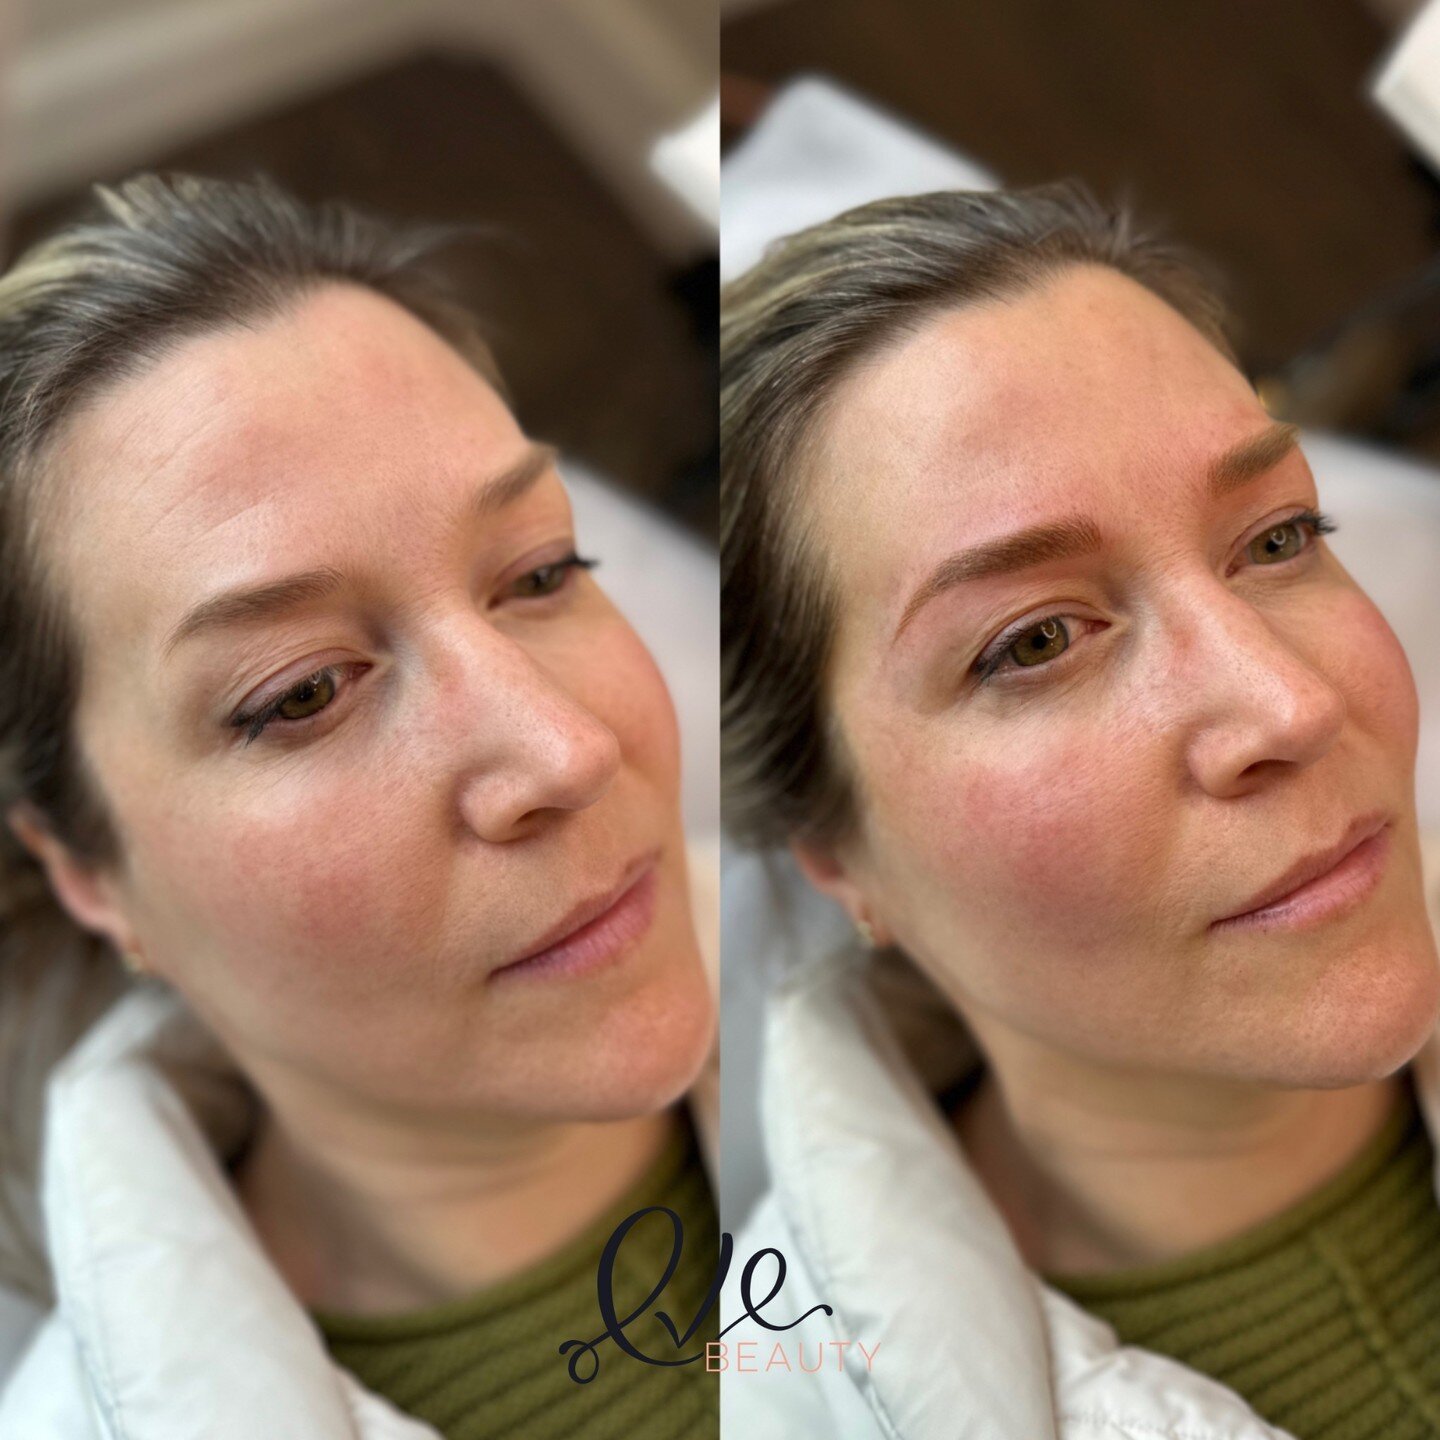 DID YOU KNOW? The healing process is not always what you expect. 

After the first few days where your brows are dark and intense , you'll notice it start to peel! Its important to remember not to pick at the brows at this time!! This helps the proce